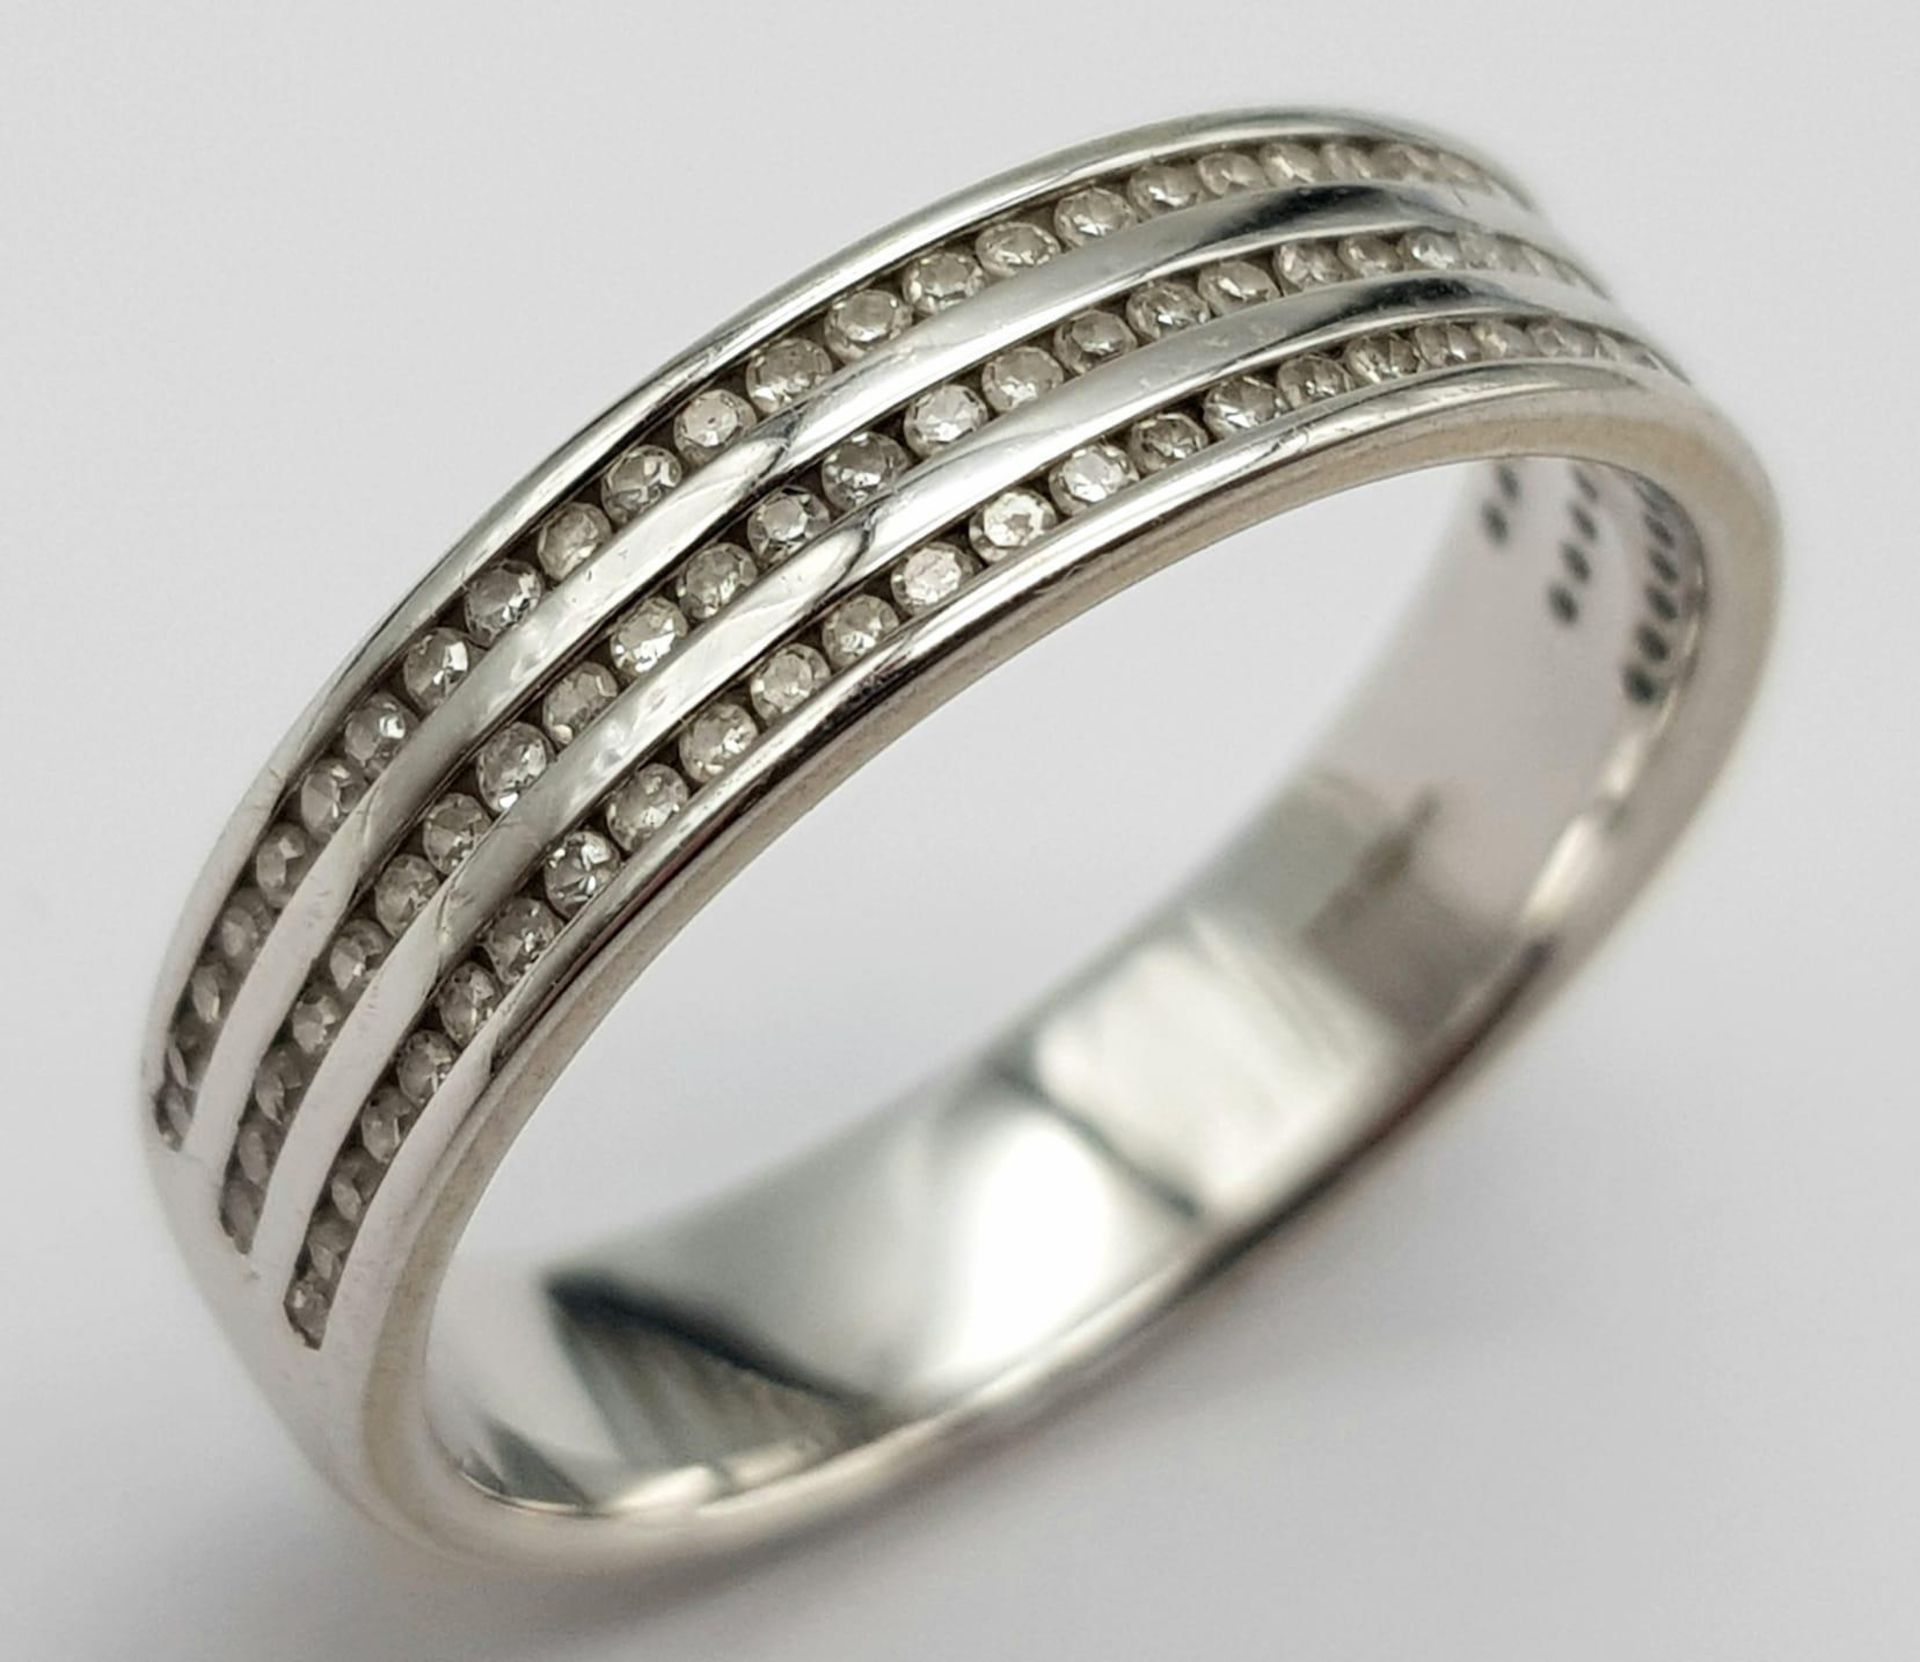 An 18K White Gold Triple Row Diamond Half Eternity Ring. 0.48ctw. Size P. 4.7g total weight.